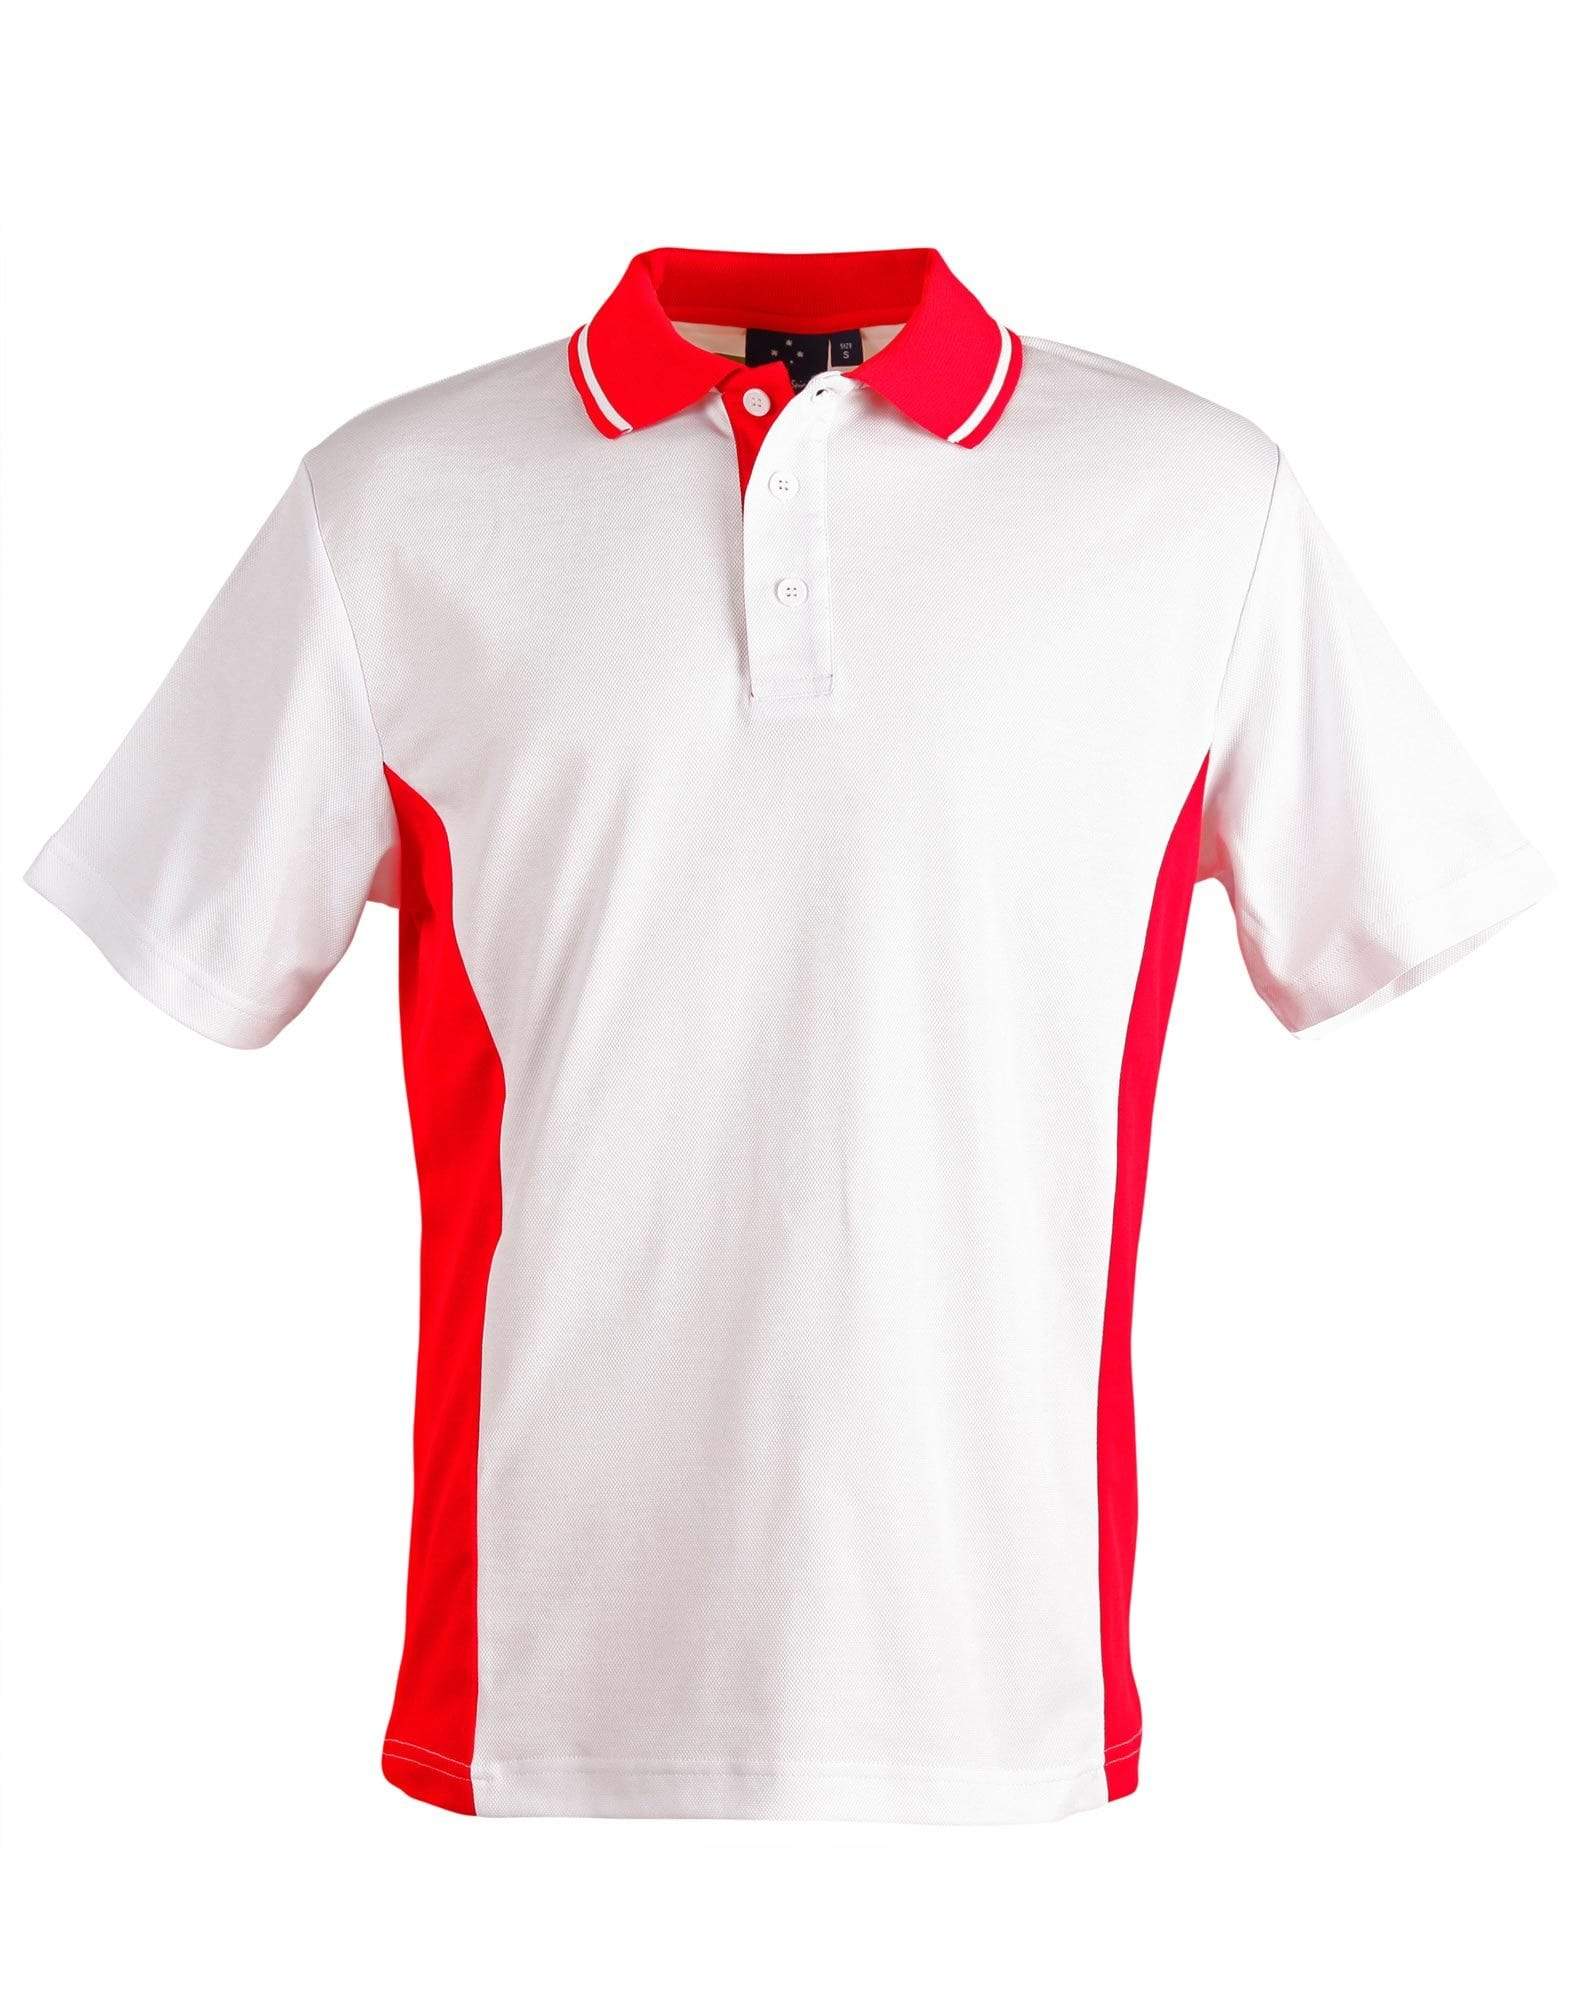 Teammate Polo Men's Ps73 Casual Wear Winning Spirit White/Red S 